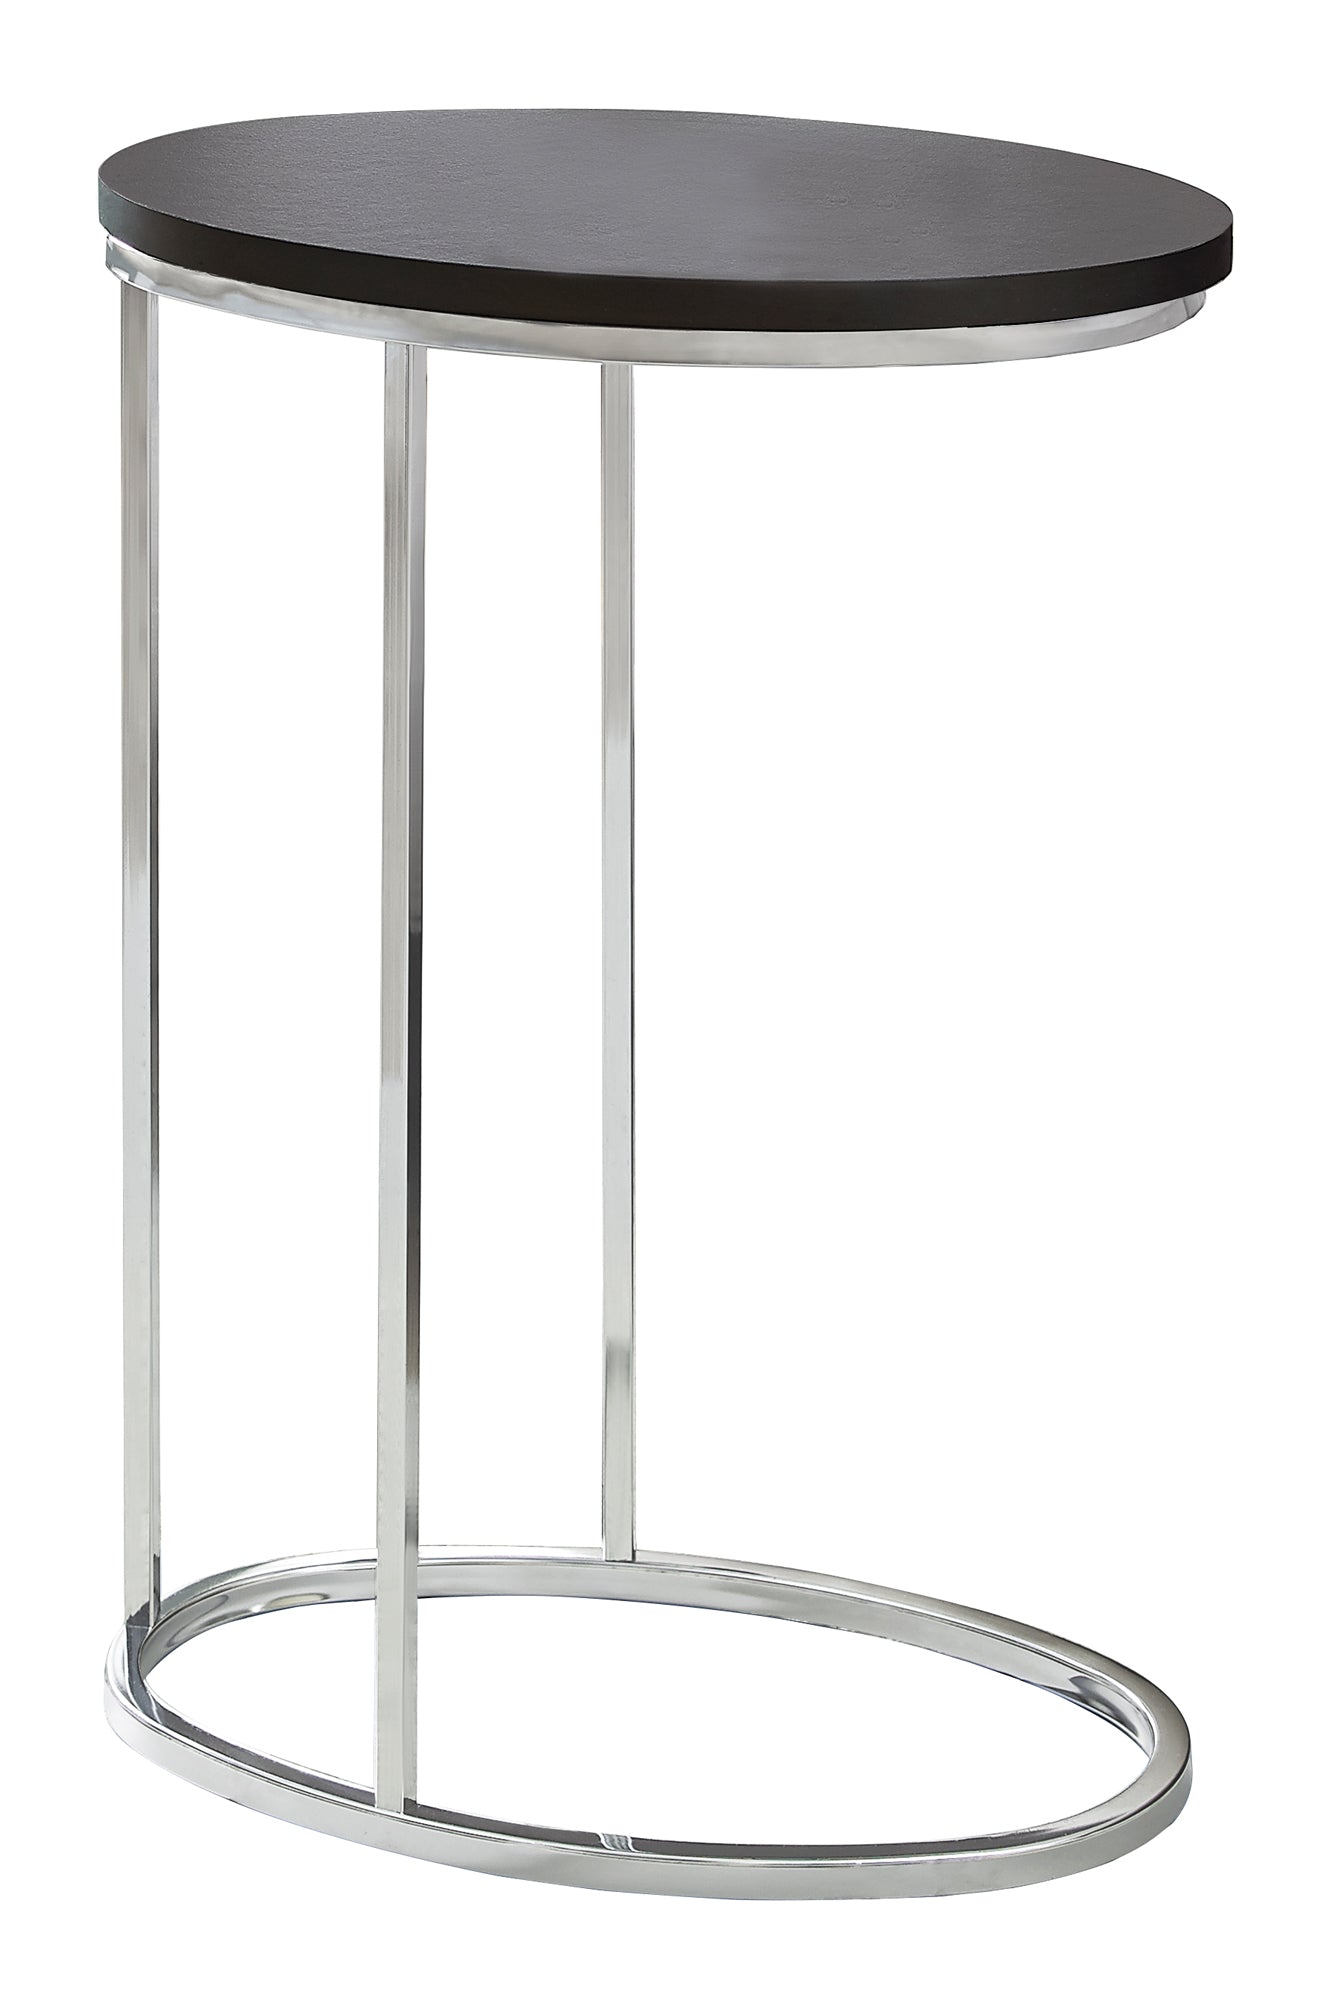 18.5" x 12" x 25" Cappuccino Particle Board Laminate Metal Accent Table